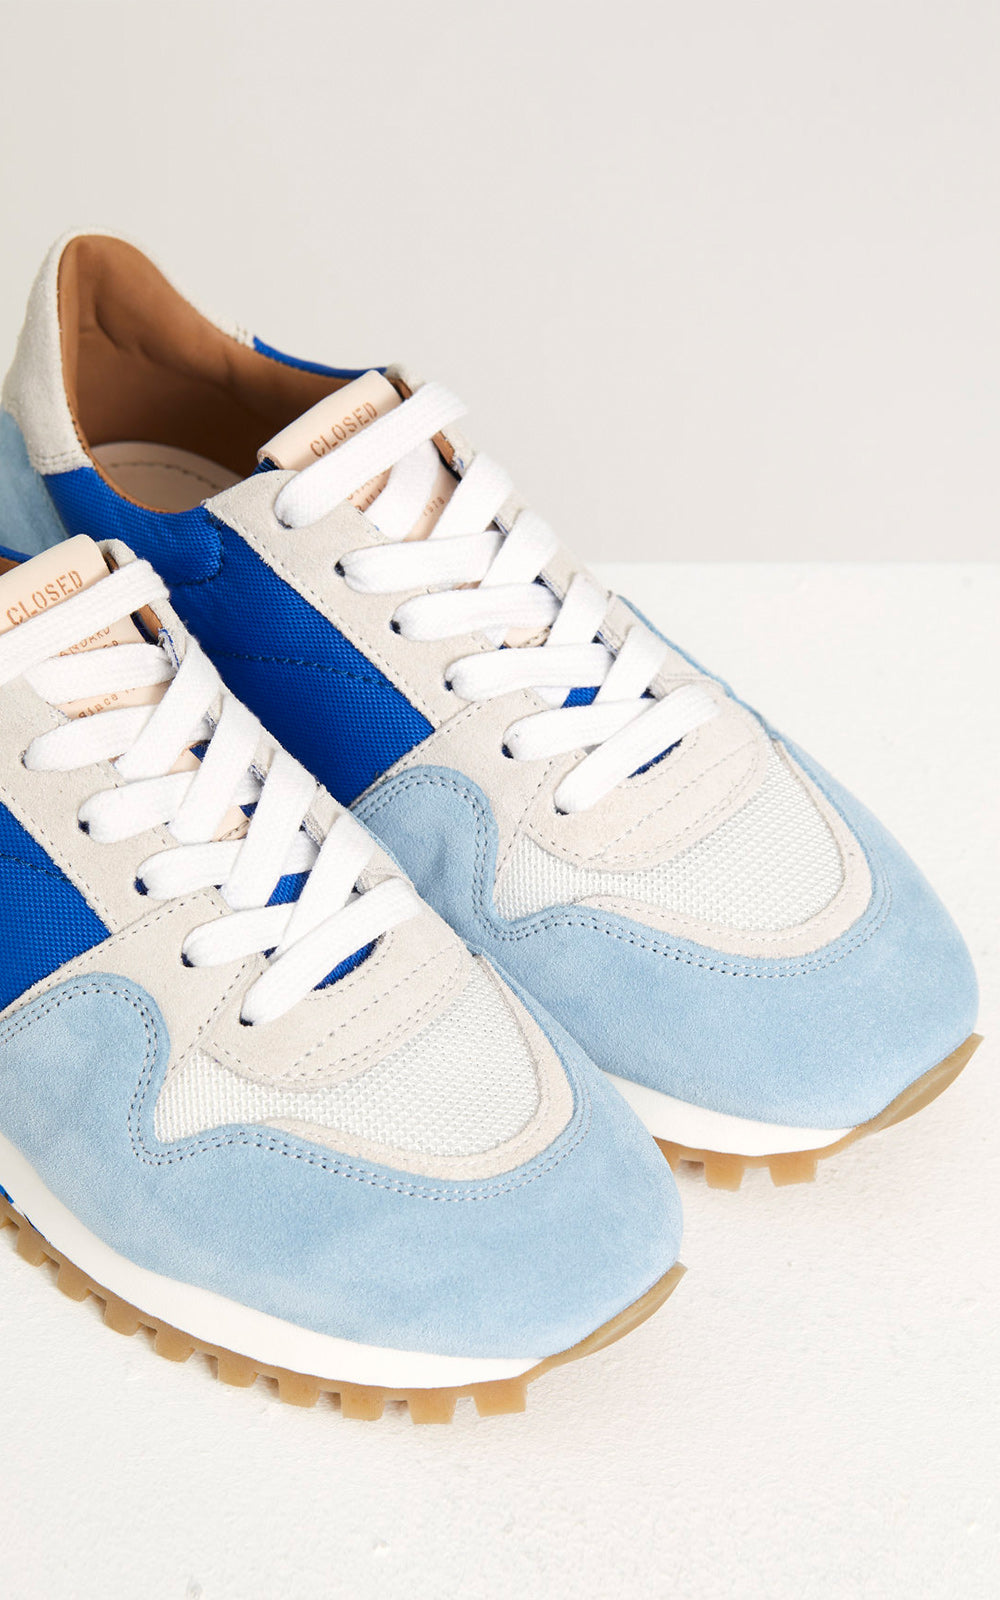 CLOSED Light Blue, & Camo Sneakers – The Shop